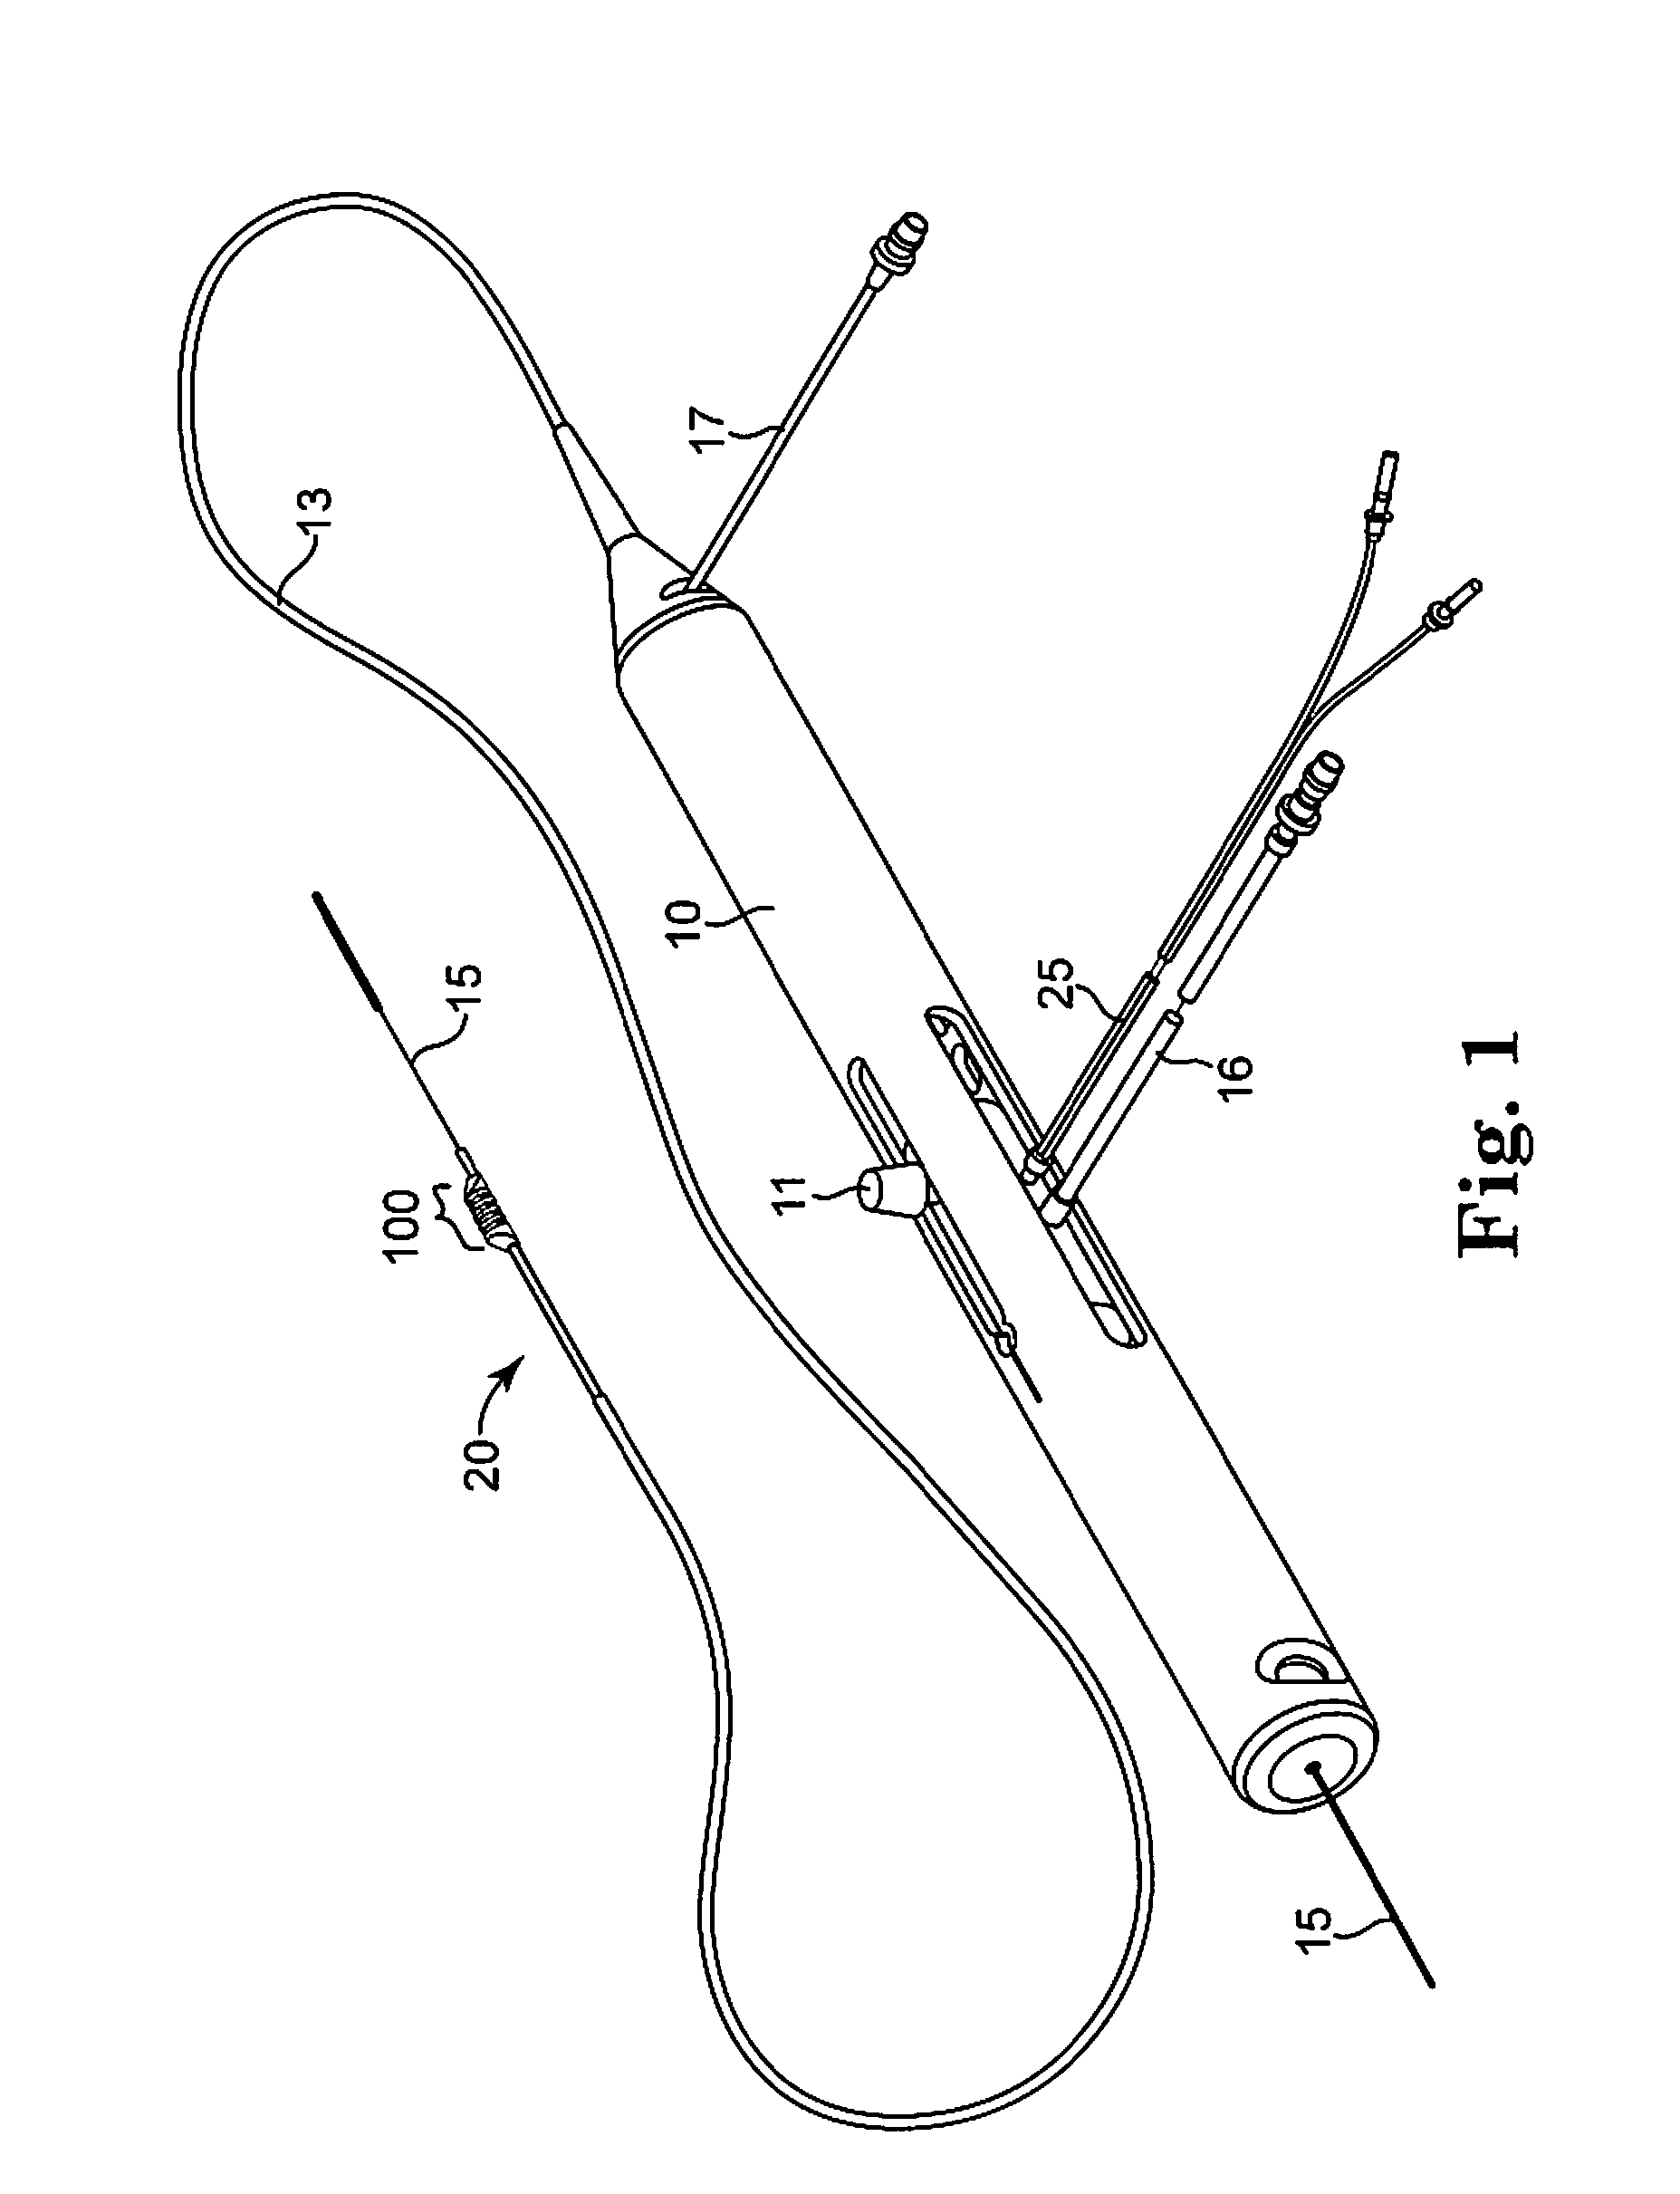 Rotational atherectomy segmented abrading head and method to improve abrading efficiency